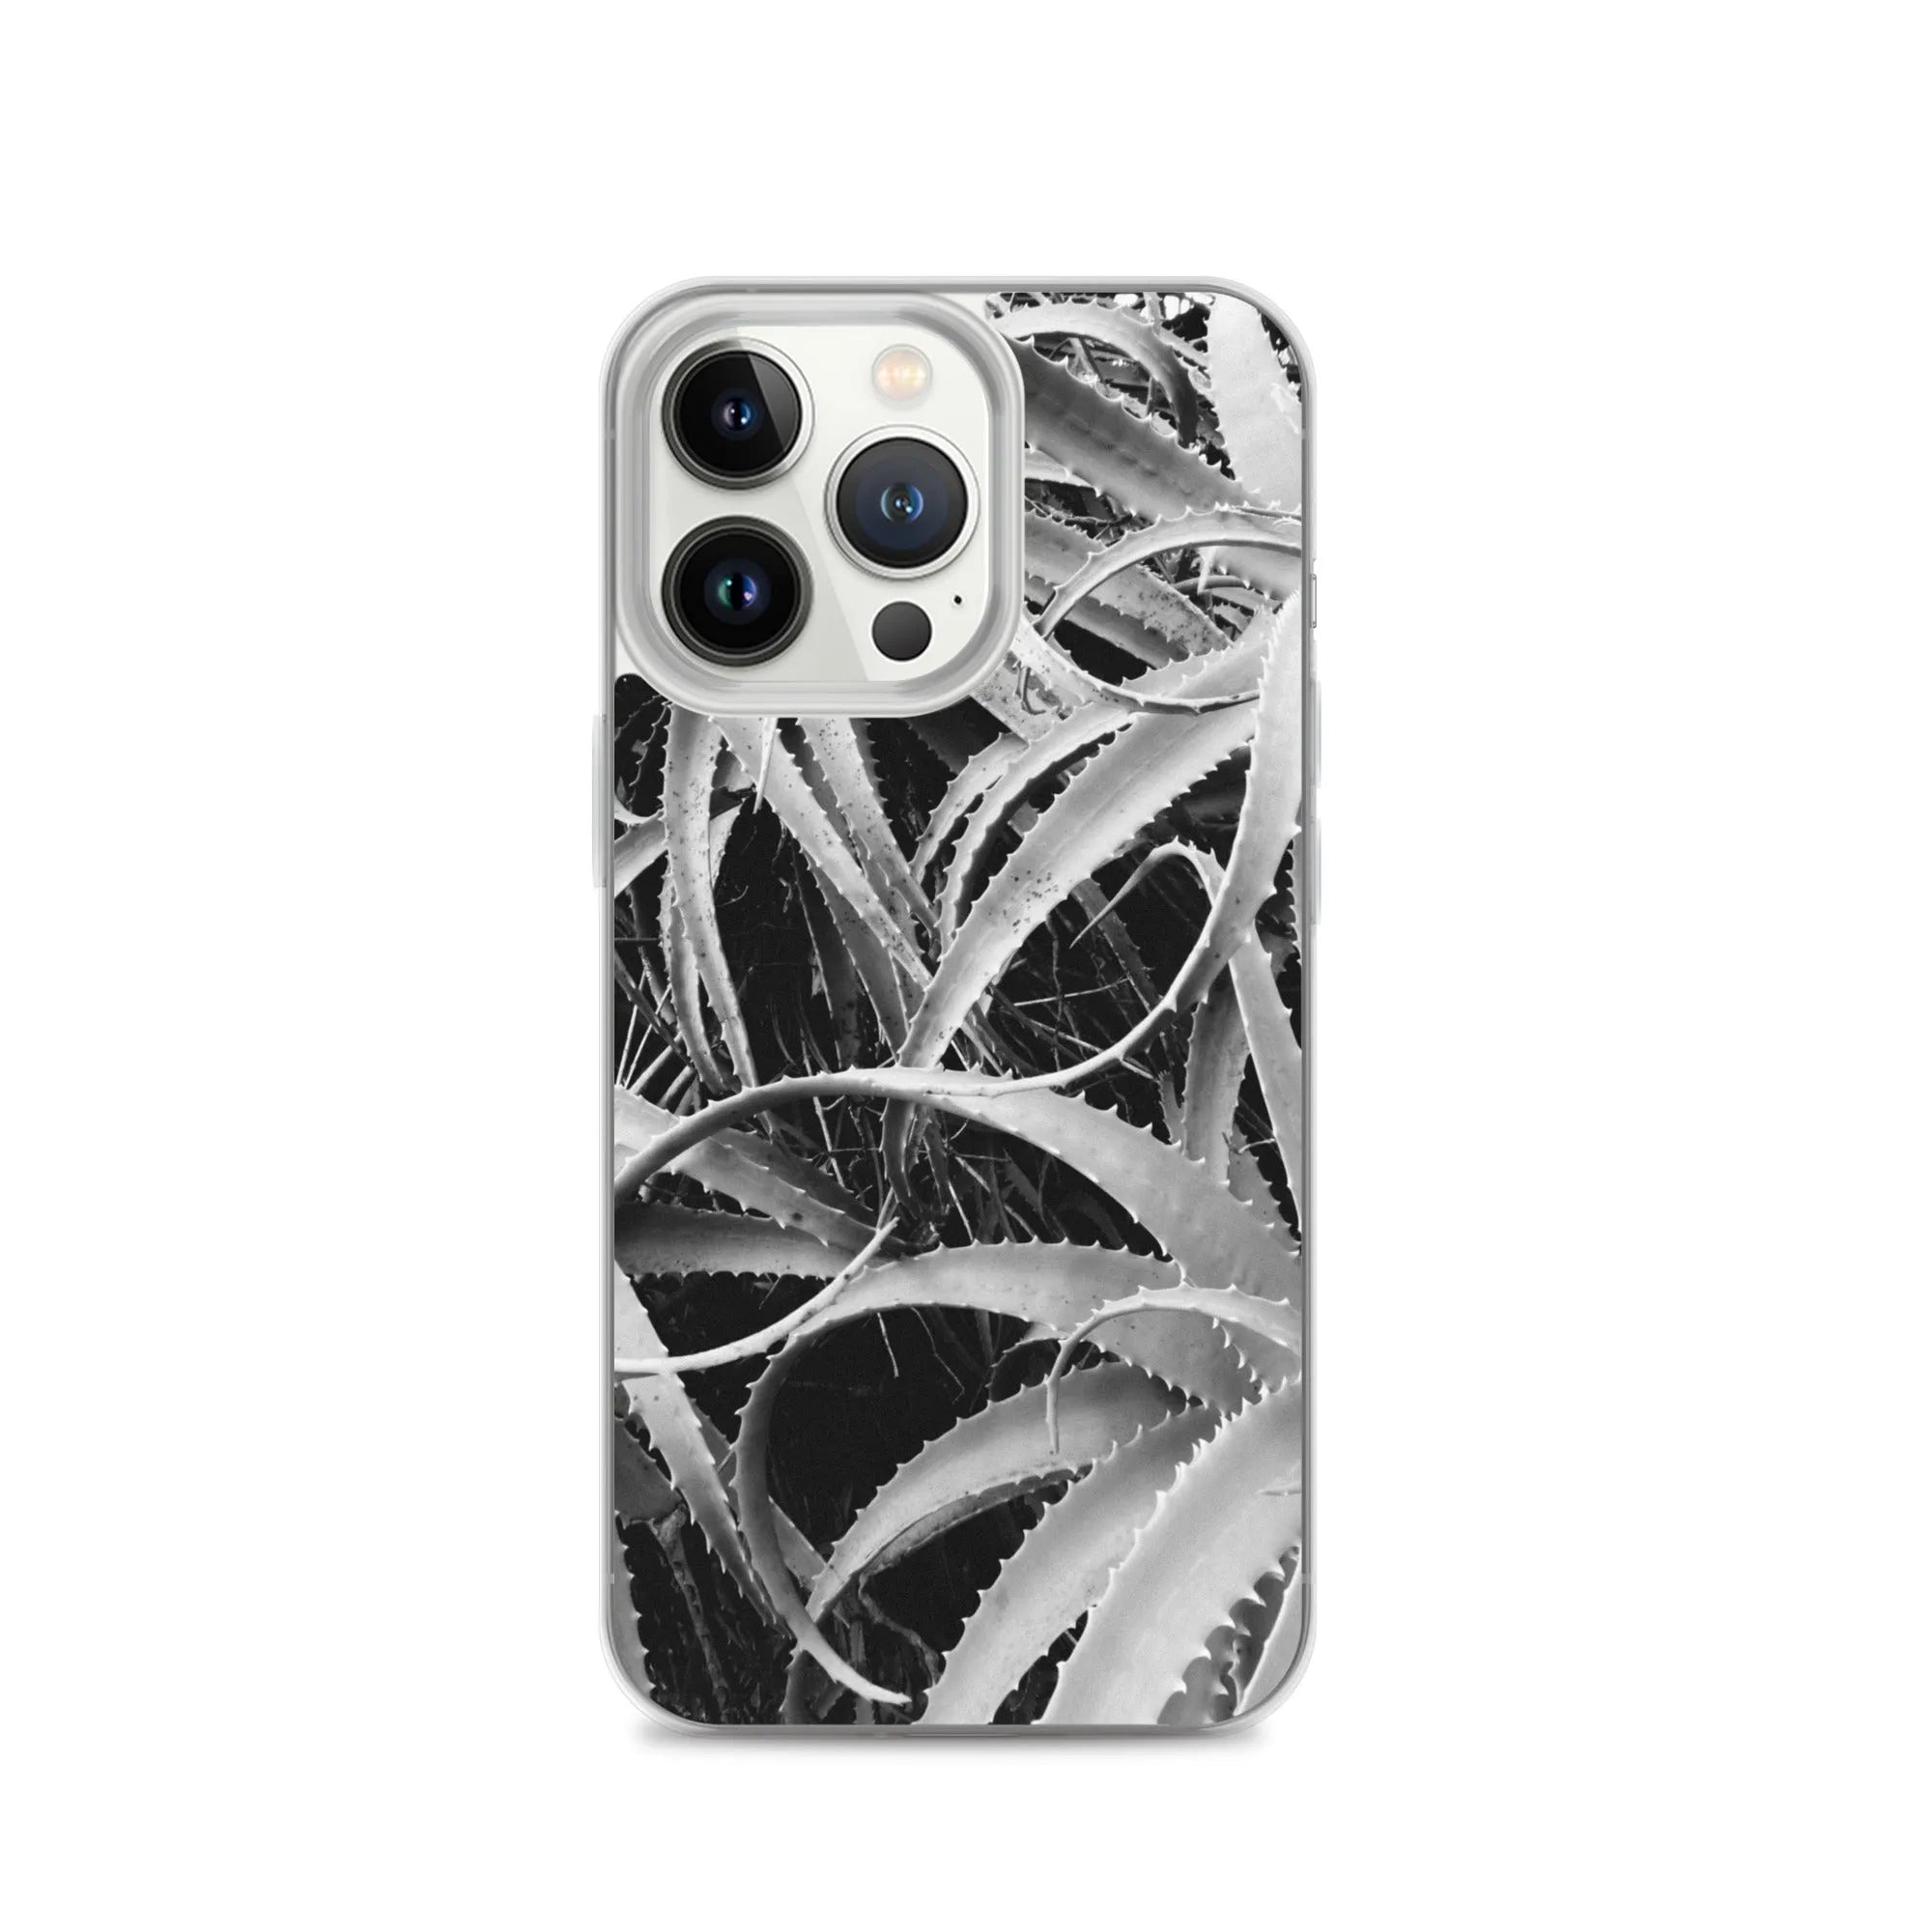 Spiked 2 + Too Botanical Art Iphone Case - Black And White - Iphone 13 Pro - Mobile Phone Cases - Aesthetic Art